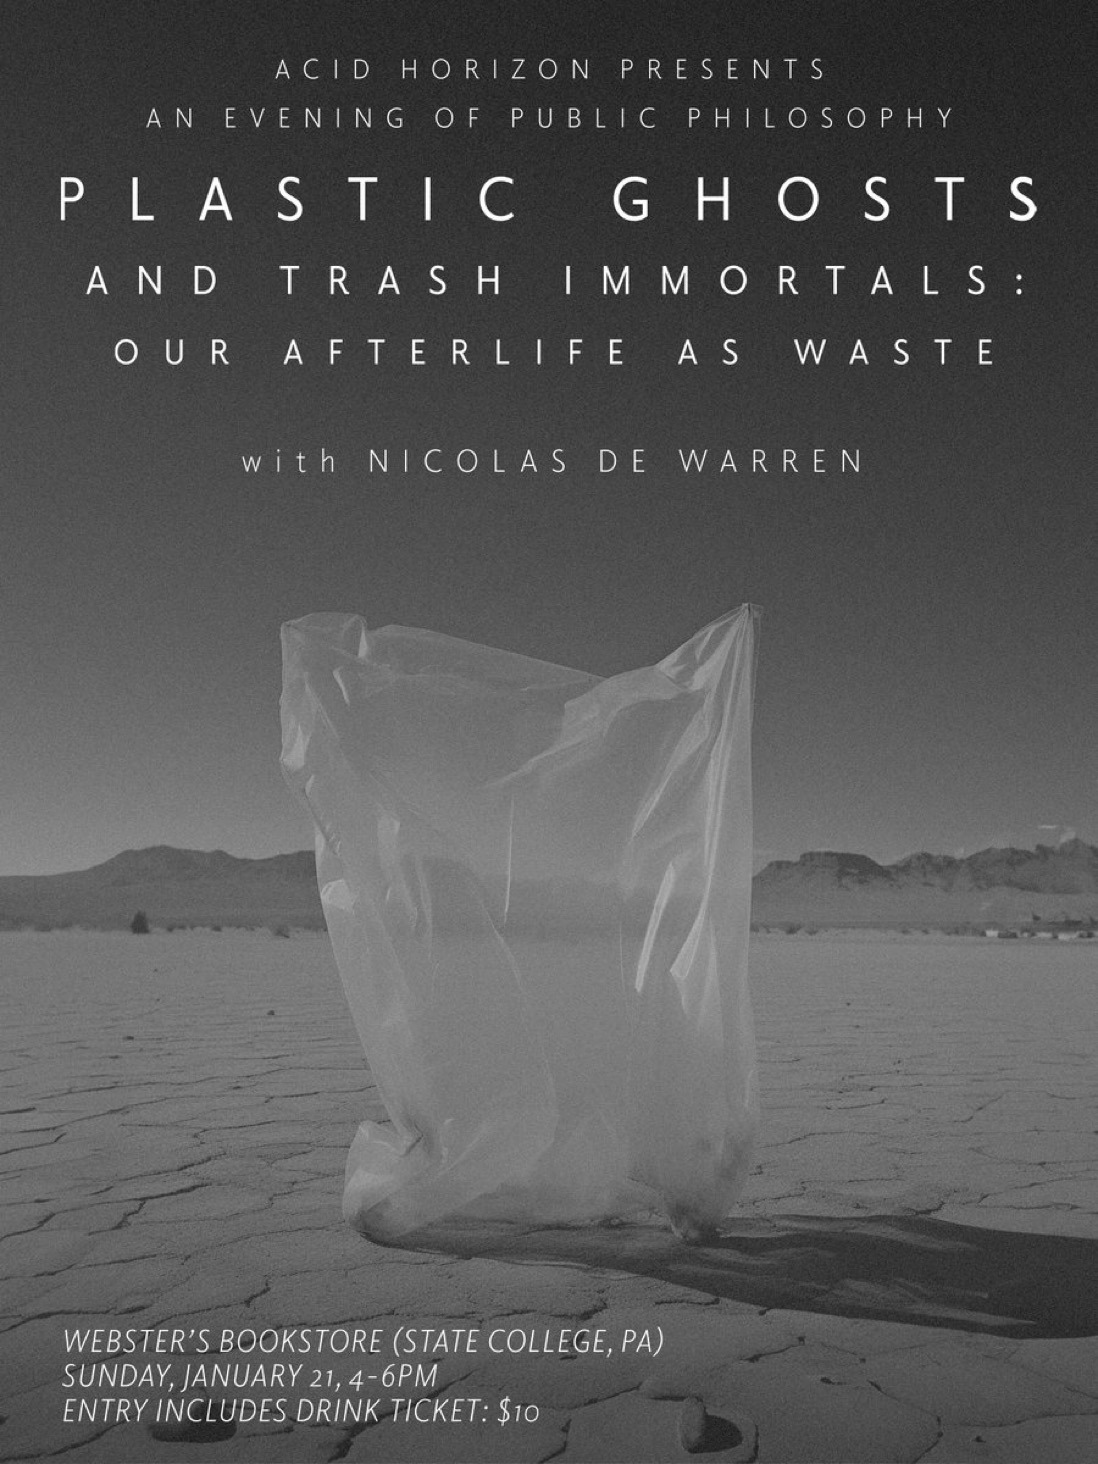 A grayscale flyer for a public philosophy talk with Nicolas De Warren, entitled "Plastic Ghosts and Trash Immortals: Our Afterlife as Waste." The event will be held at Webster's Bookstore on Sunday, January 21 from 4-6pm.